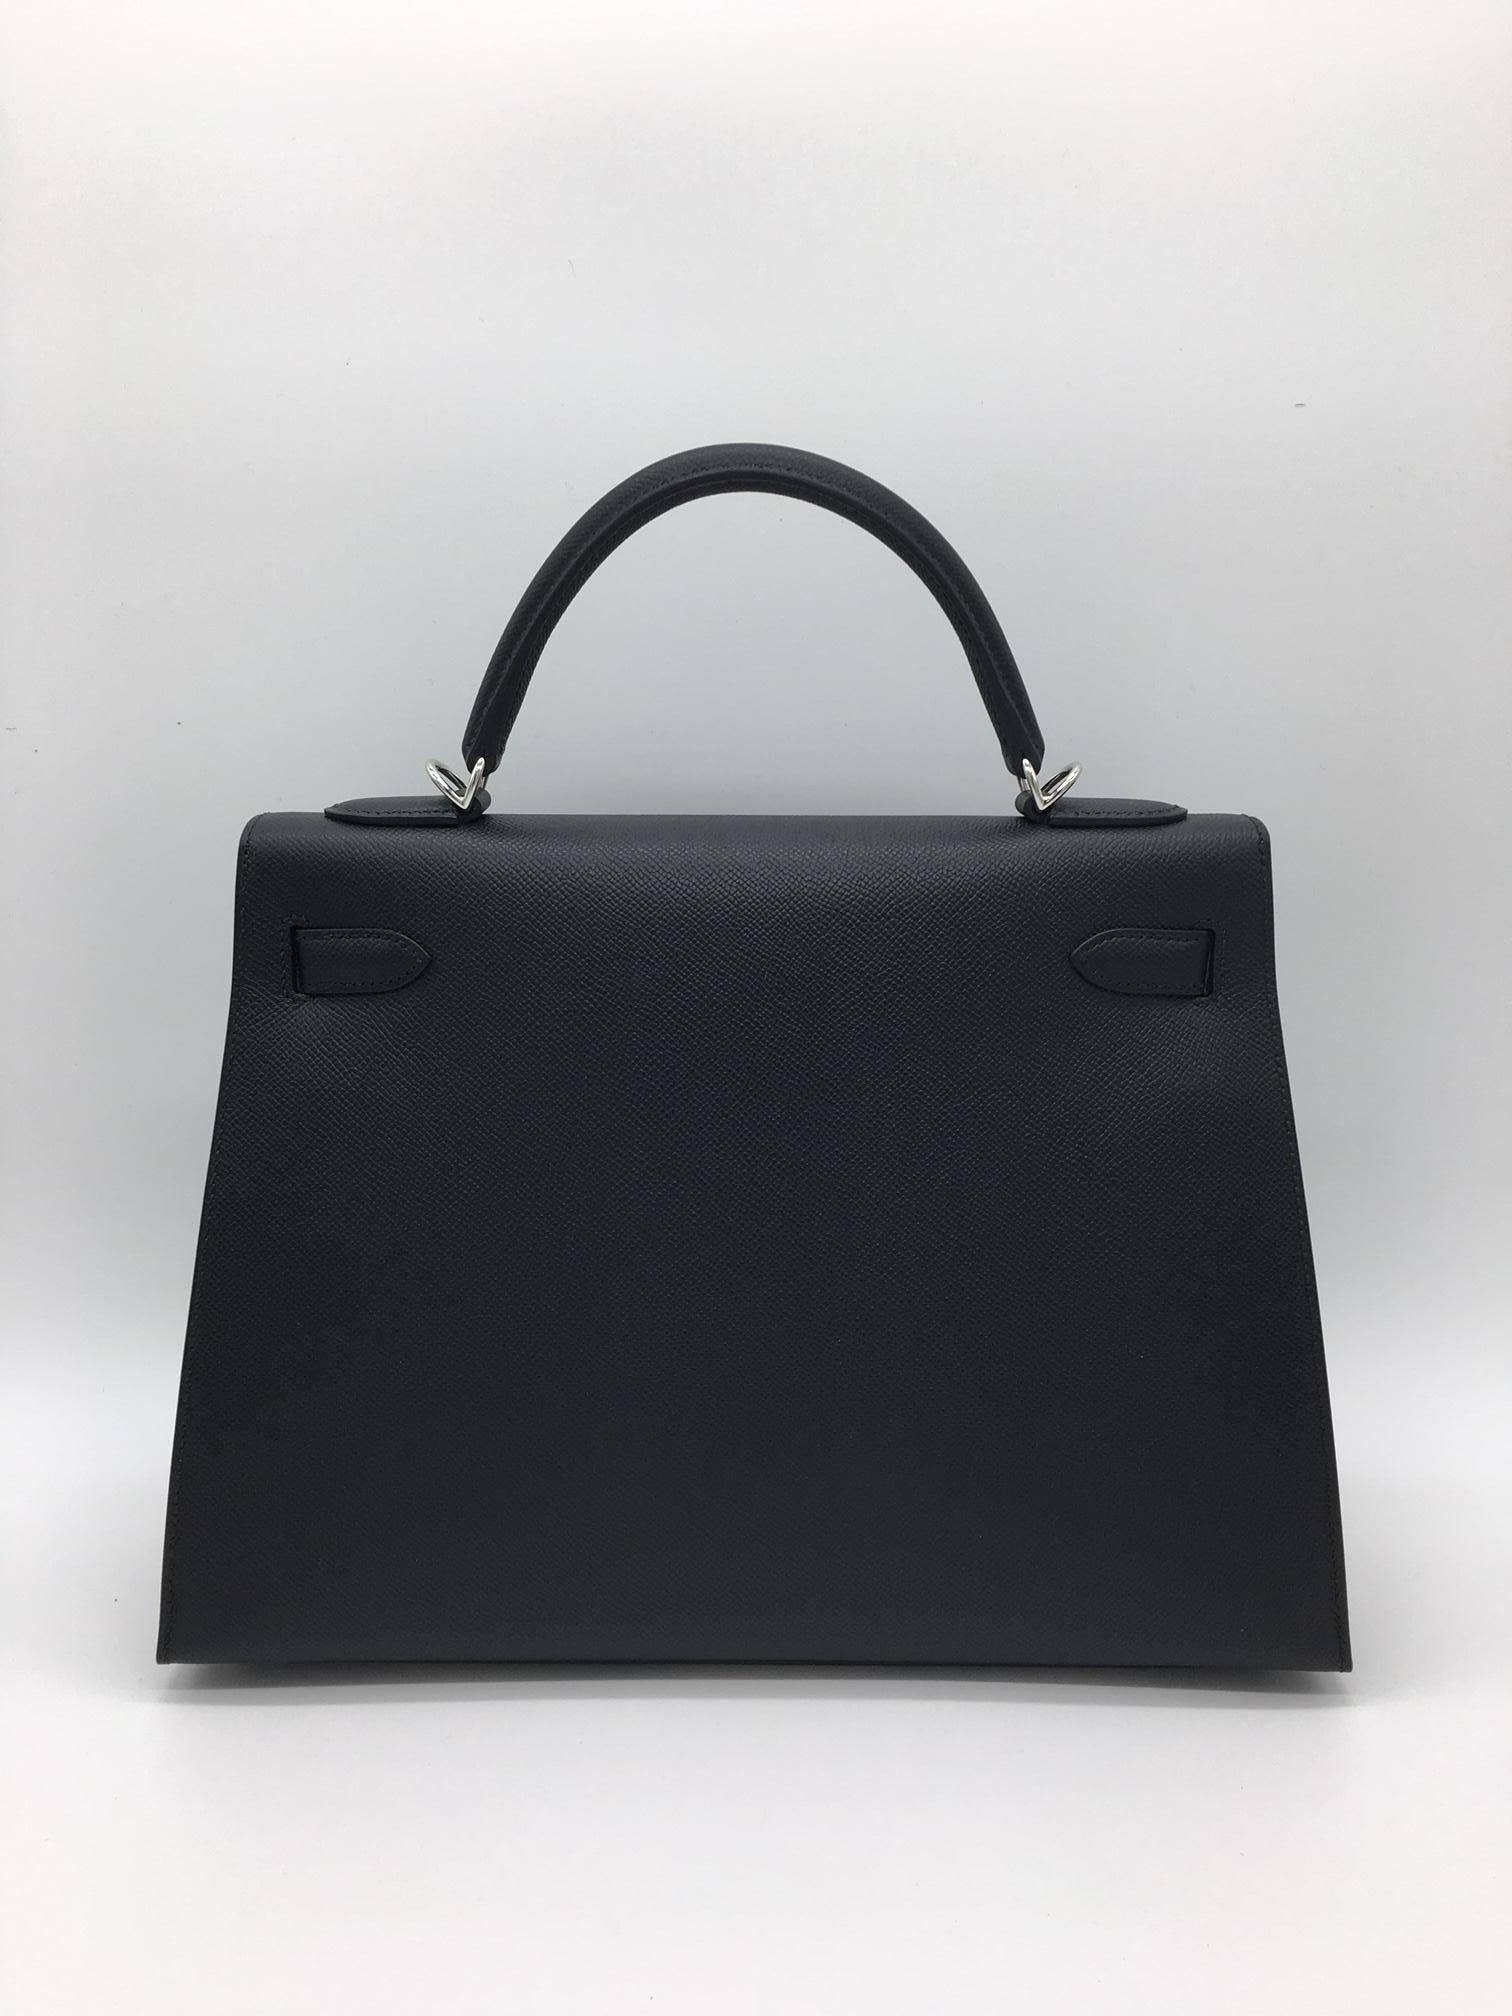 Probably one of the most glamorous and famous Hermes bags – a Black Kelly with Palladium Hardware in the structured Sellier design with external stitching which gives it a particularly distinctive look. This is a 32cm Black Kelly Sellier in Epsom